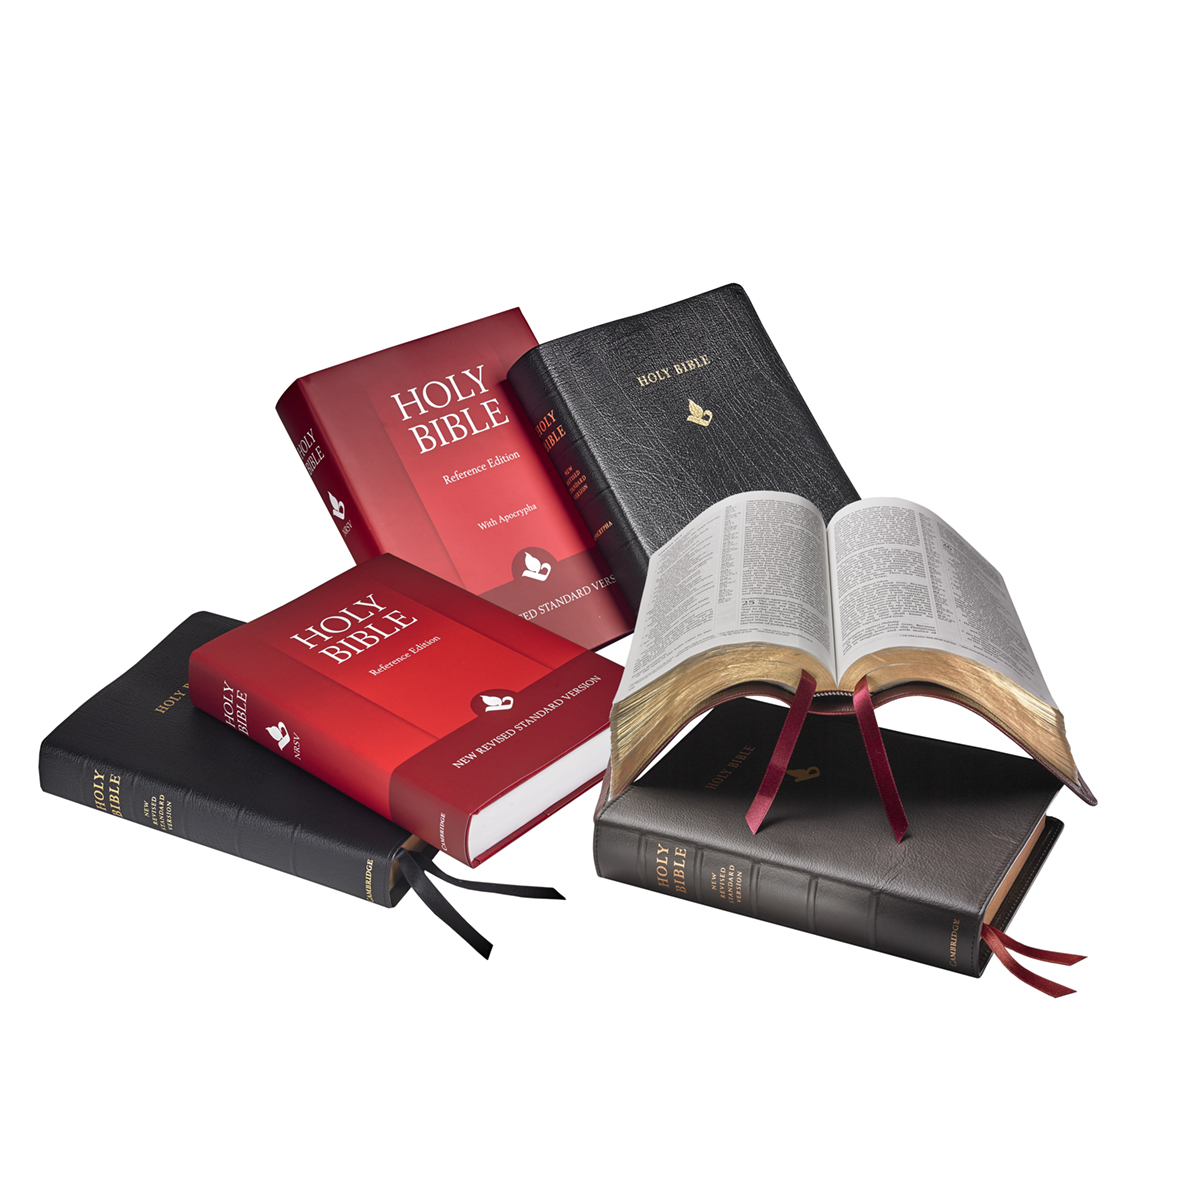 NRSV Bibles in hardback and leather